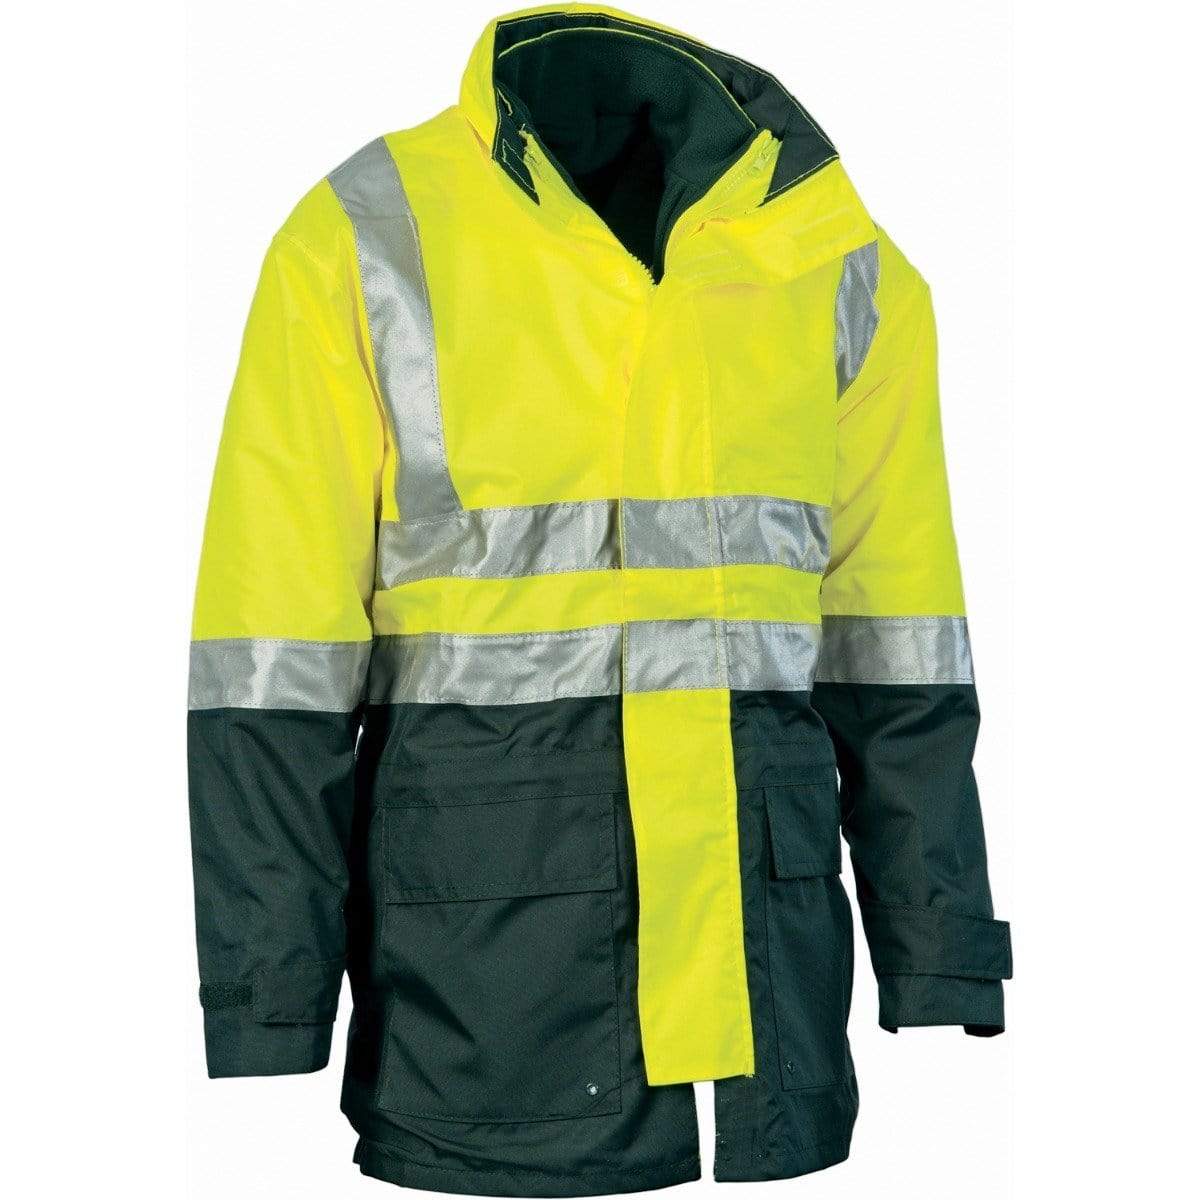 Dnc Workwear 4-in-1 Hi-vis Two-tone Breathable Jacket With Vest And 3m Reflective Tape - 3864 Work Wear DNC Workwear Yellow/Bottle Green S 